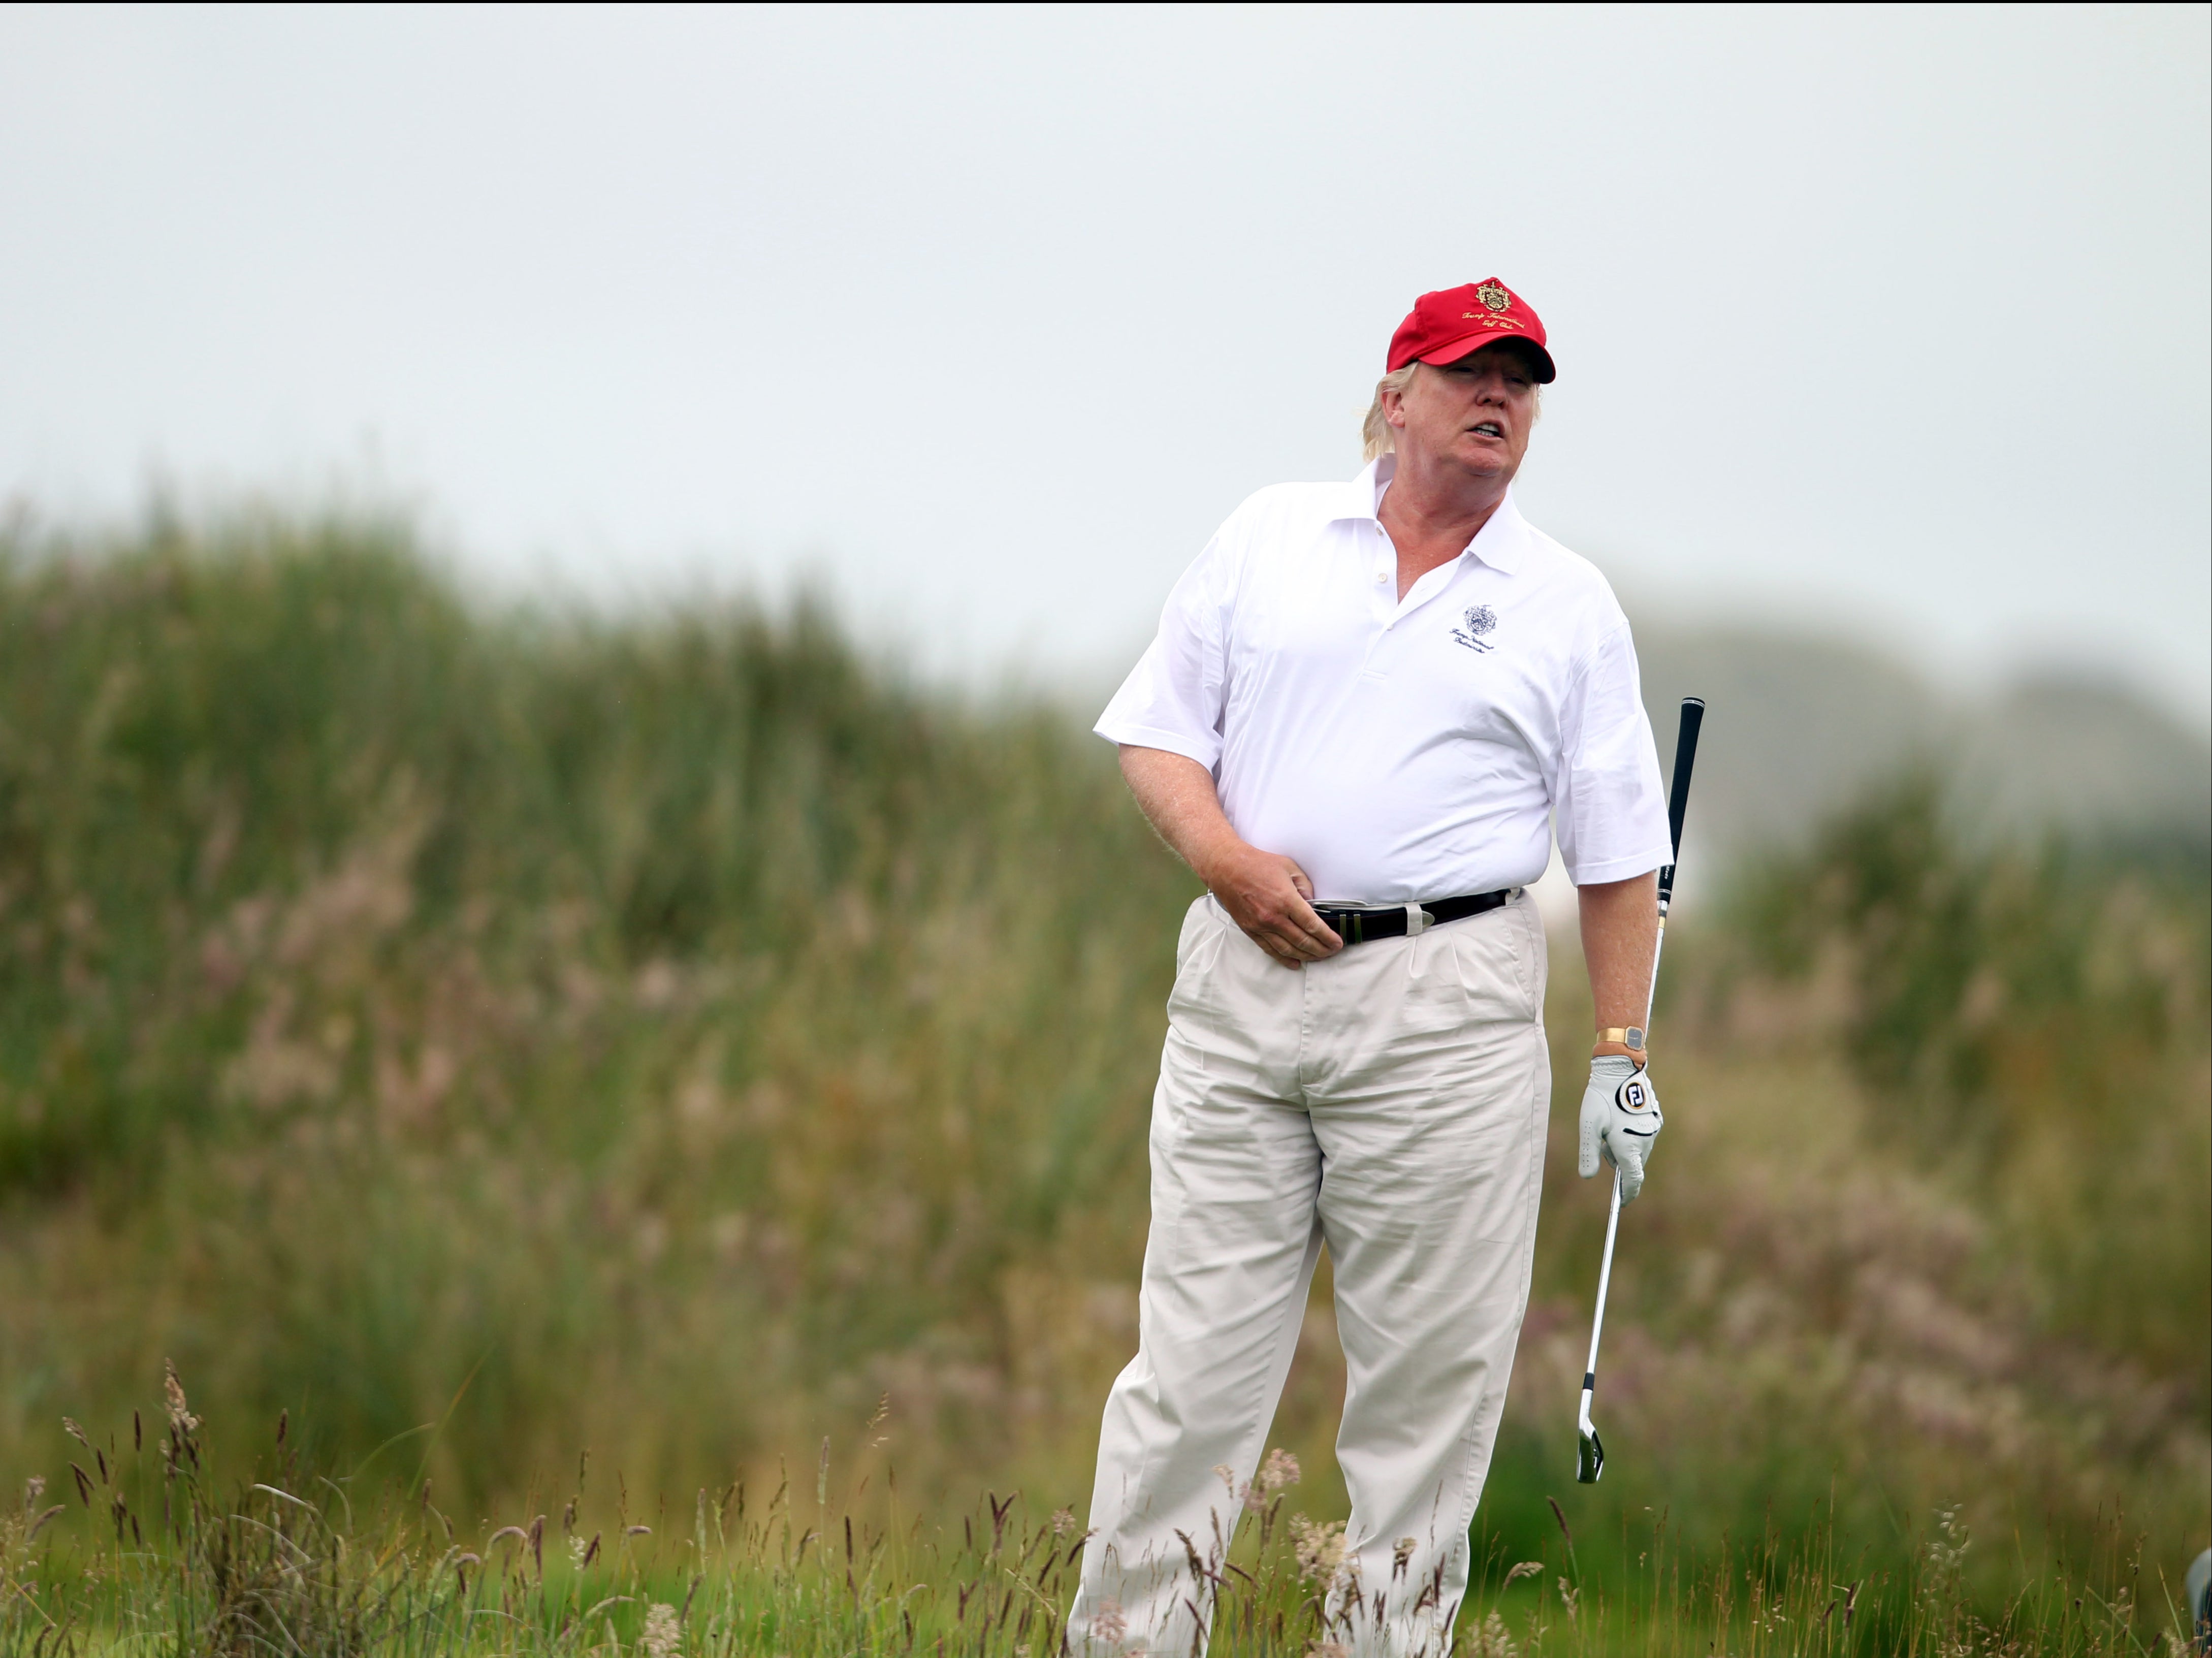 Complaints have been made in the past about the 74-year-old reportedly funnelling Republican donations into his own pockets, including at his private resort Mar-a-Lago, where he is pictured playing golf.